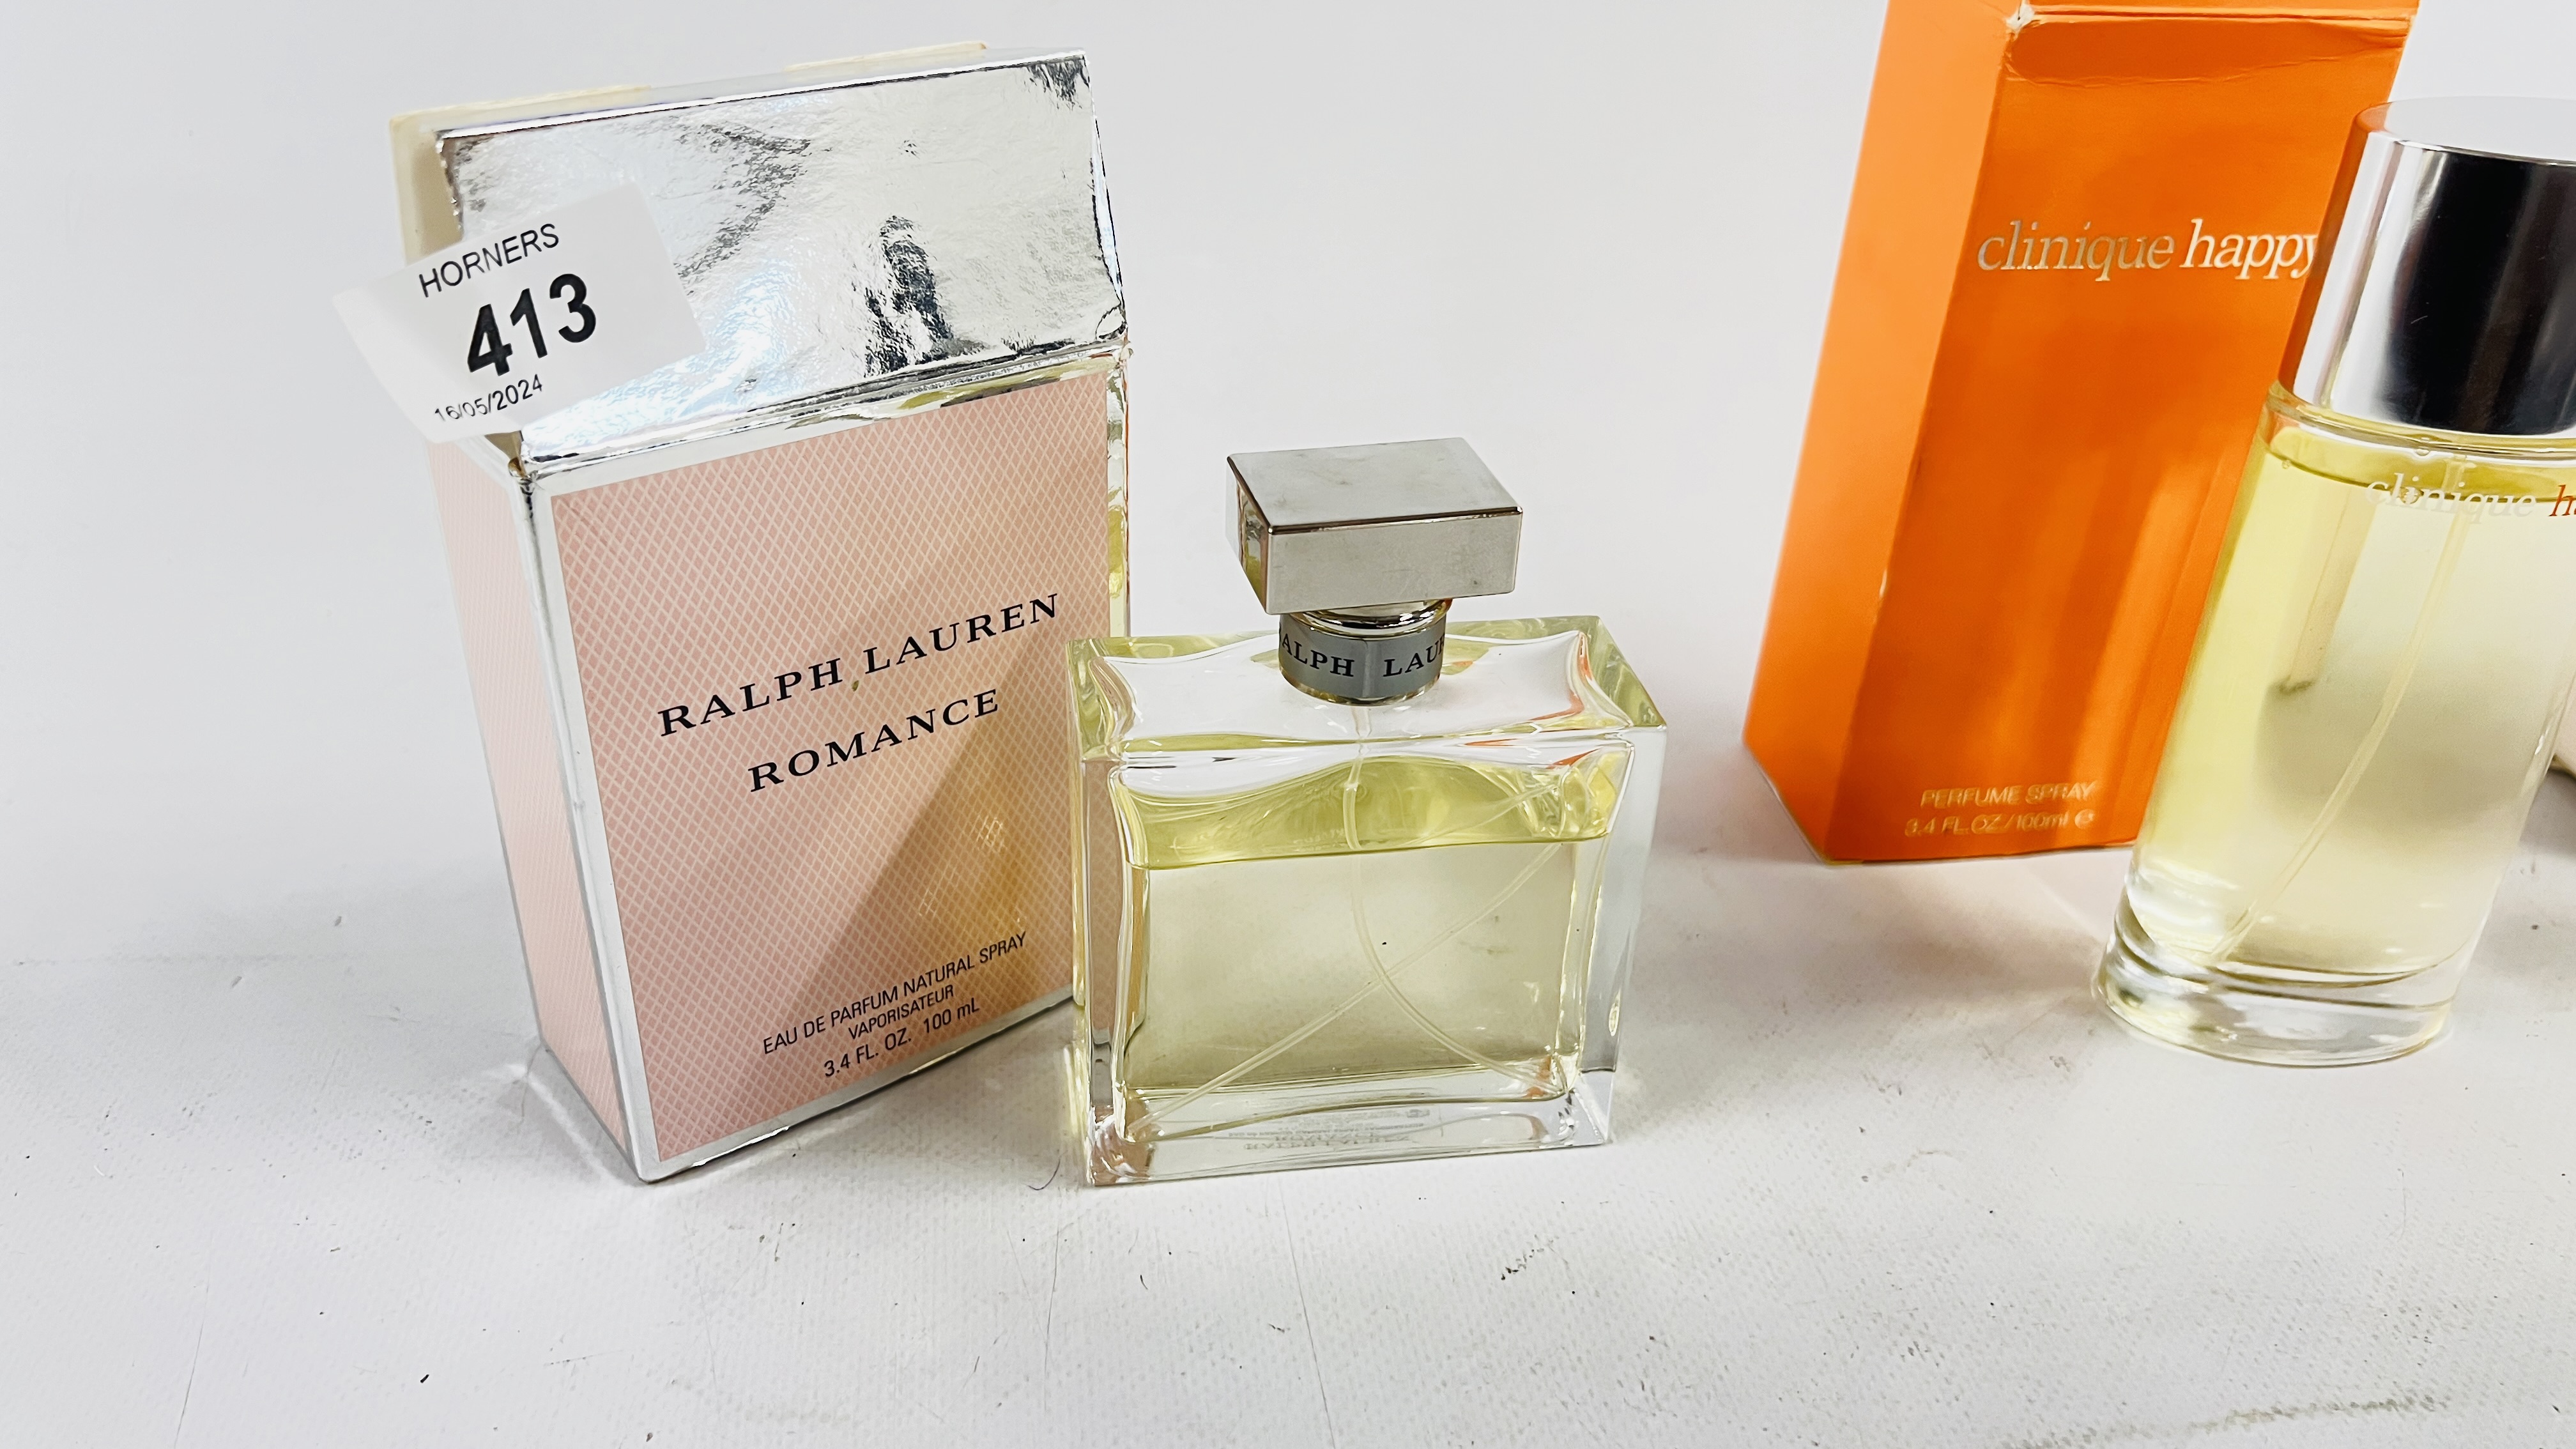 A GROUP OF BOXED PART USED FRAGRANCES TO INCLUDE "CHRISTIAN DIOR" J'ADORE GIFT SET, - Image 2 of 5